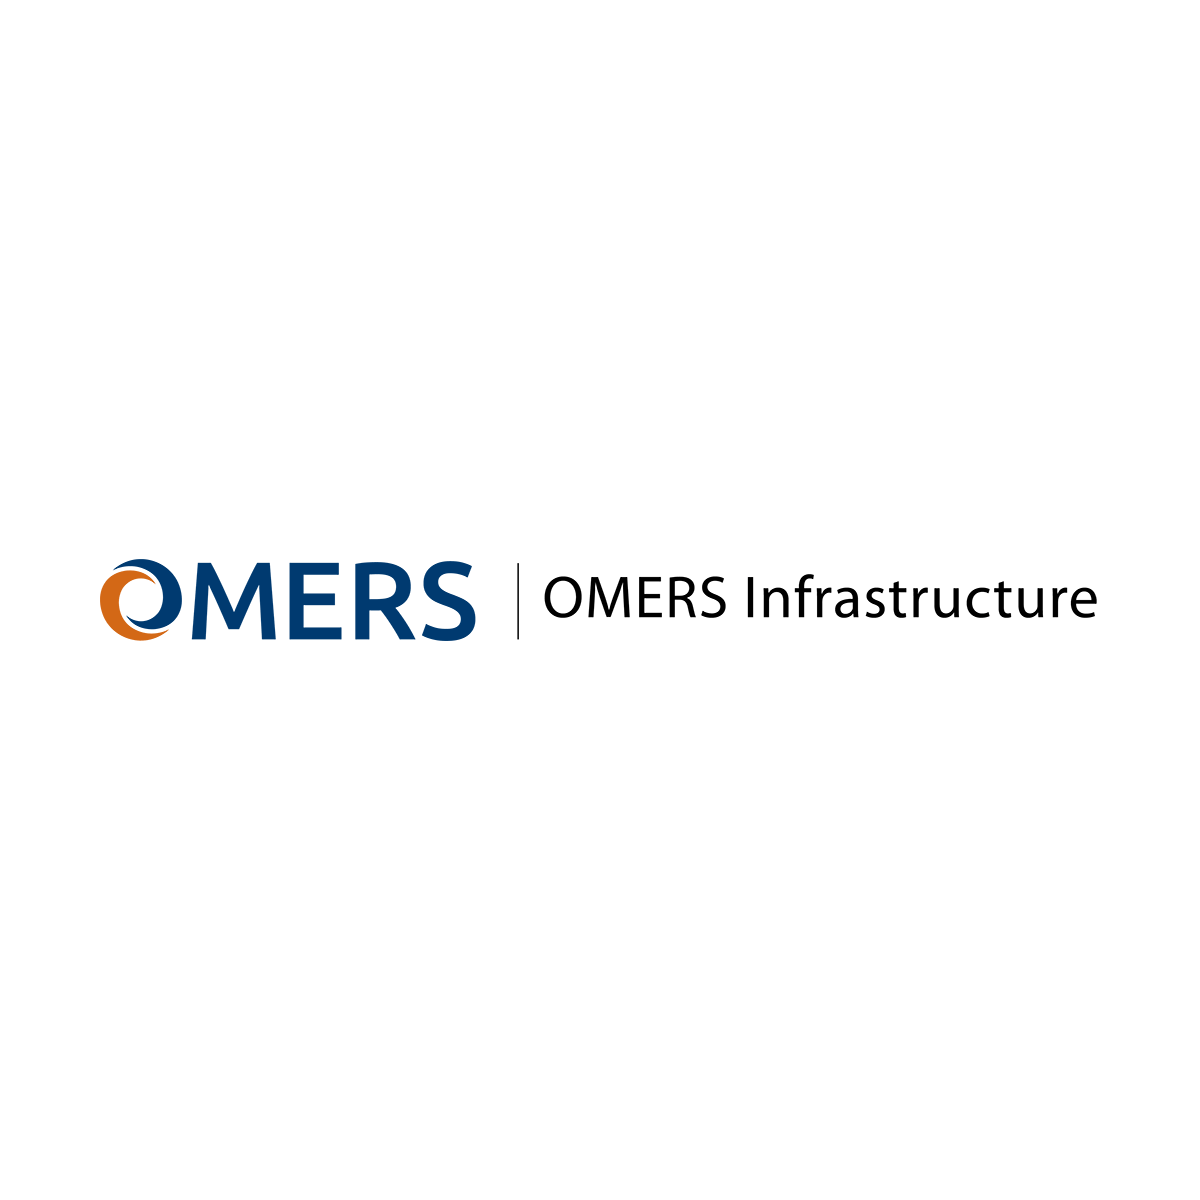 Infrastructure Logo - OMERS Infrastructure